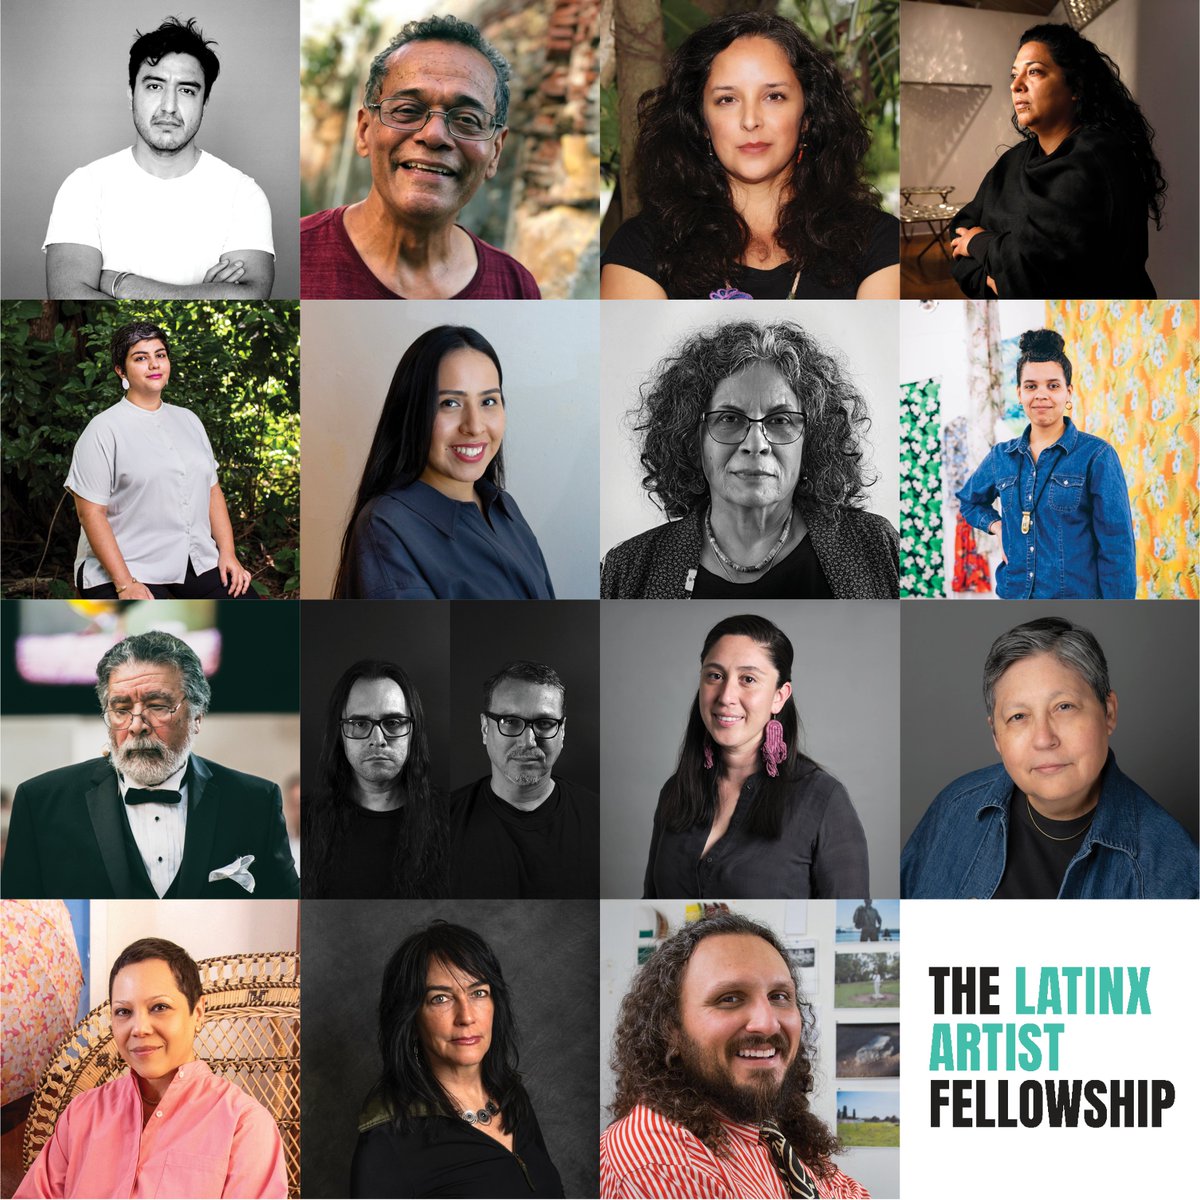 I am excited to share that I have been awarded the Latinx Artist Fellowship!

The Latinx Artist Fellowship is administered by US Latinx Art Forum. To learn more, click the link below:
tinyurl.com/49uk2nvb

#LatinxArtistFellowship #LatinxArt #Art